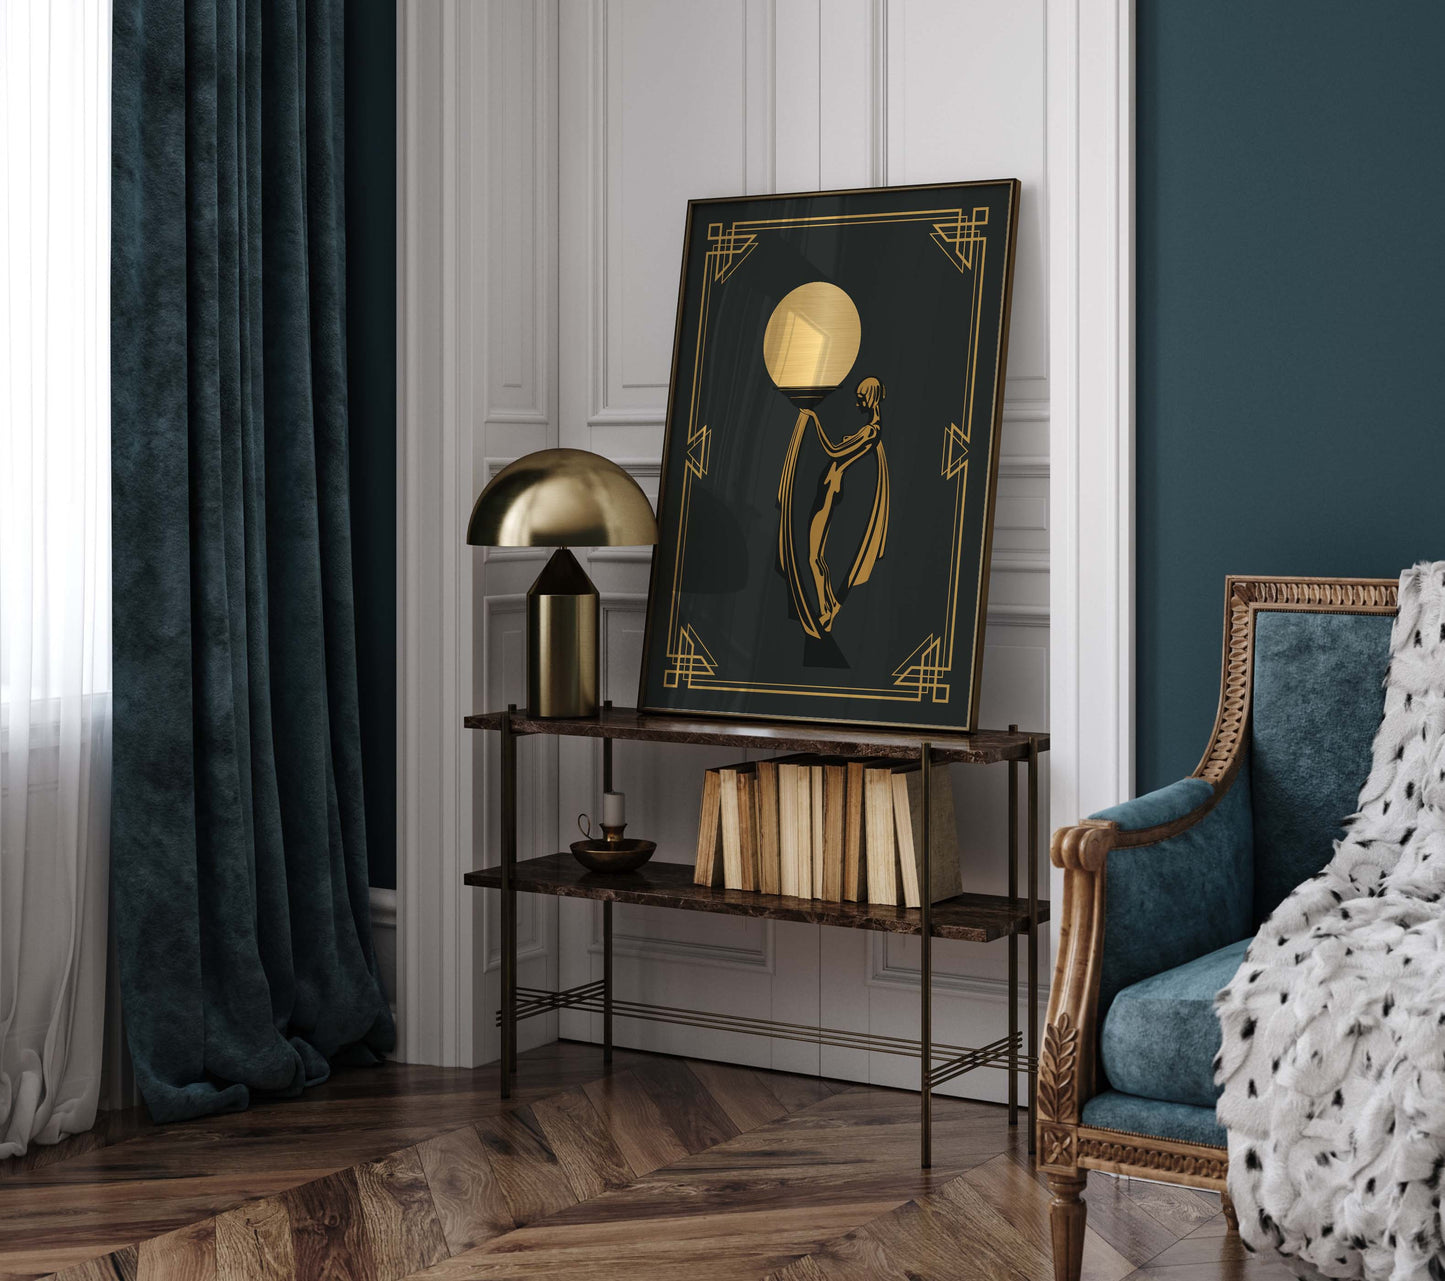 Art deco poster in black and gold